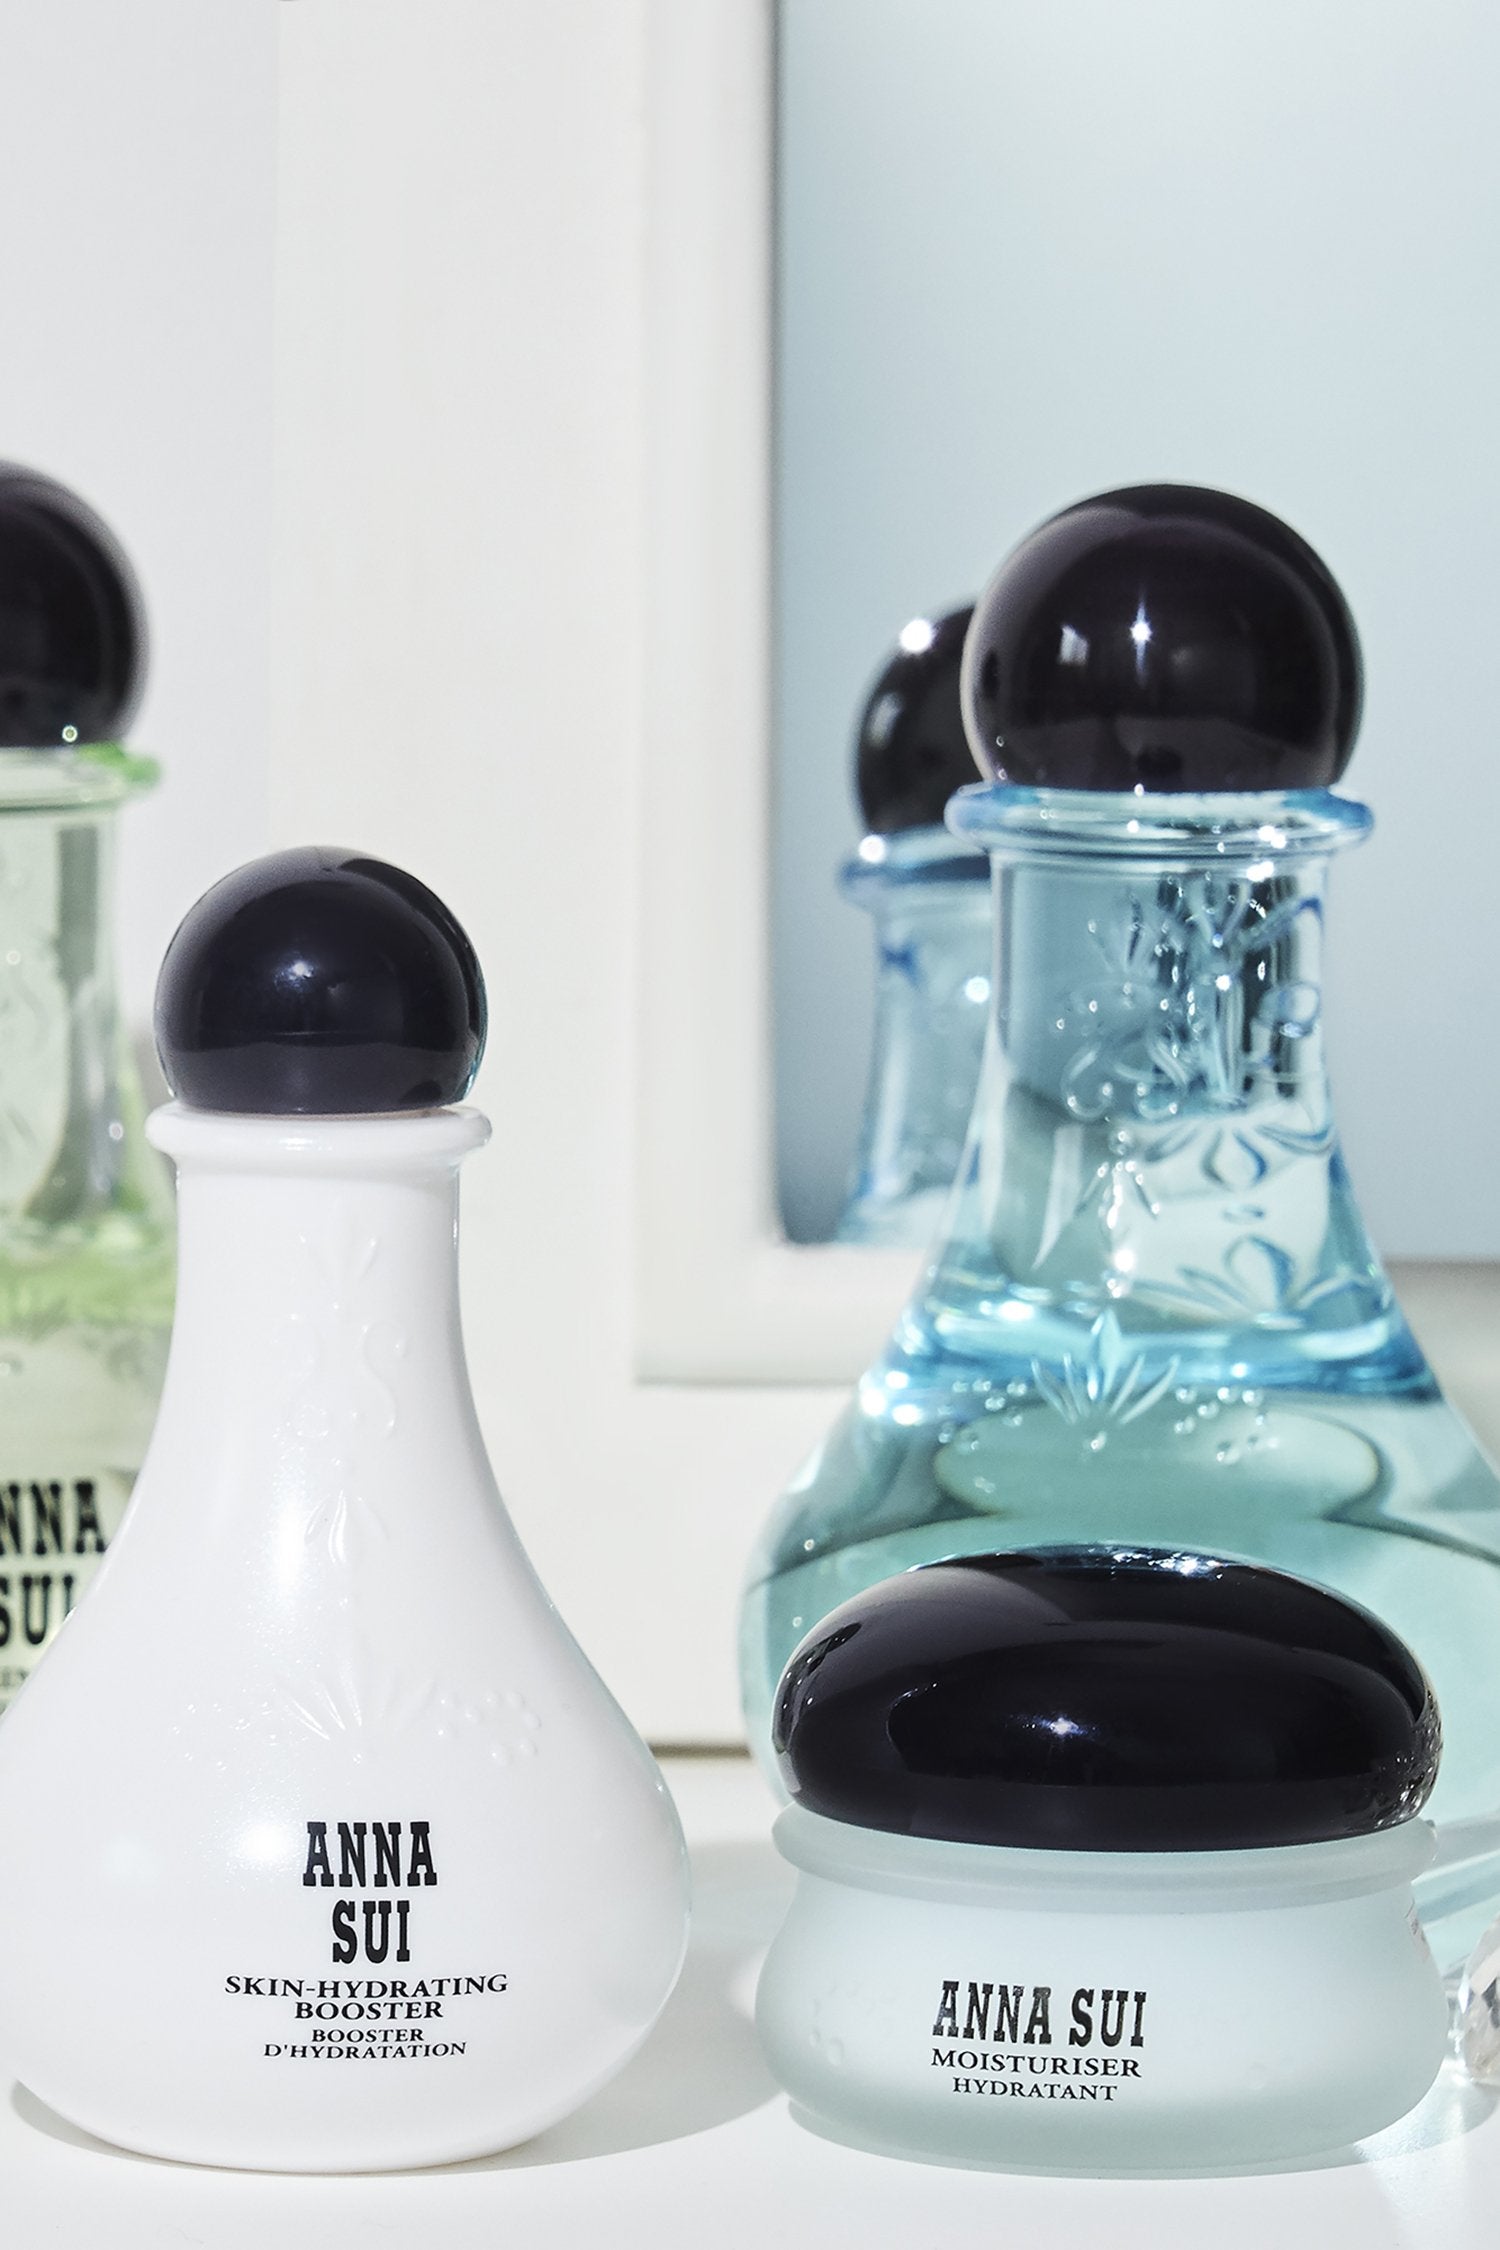 Skin-Hydrating Booster, Anna Sui Moisturizer Hydratant, decorating bottle, in a bathroom décor.